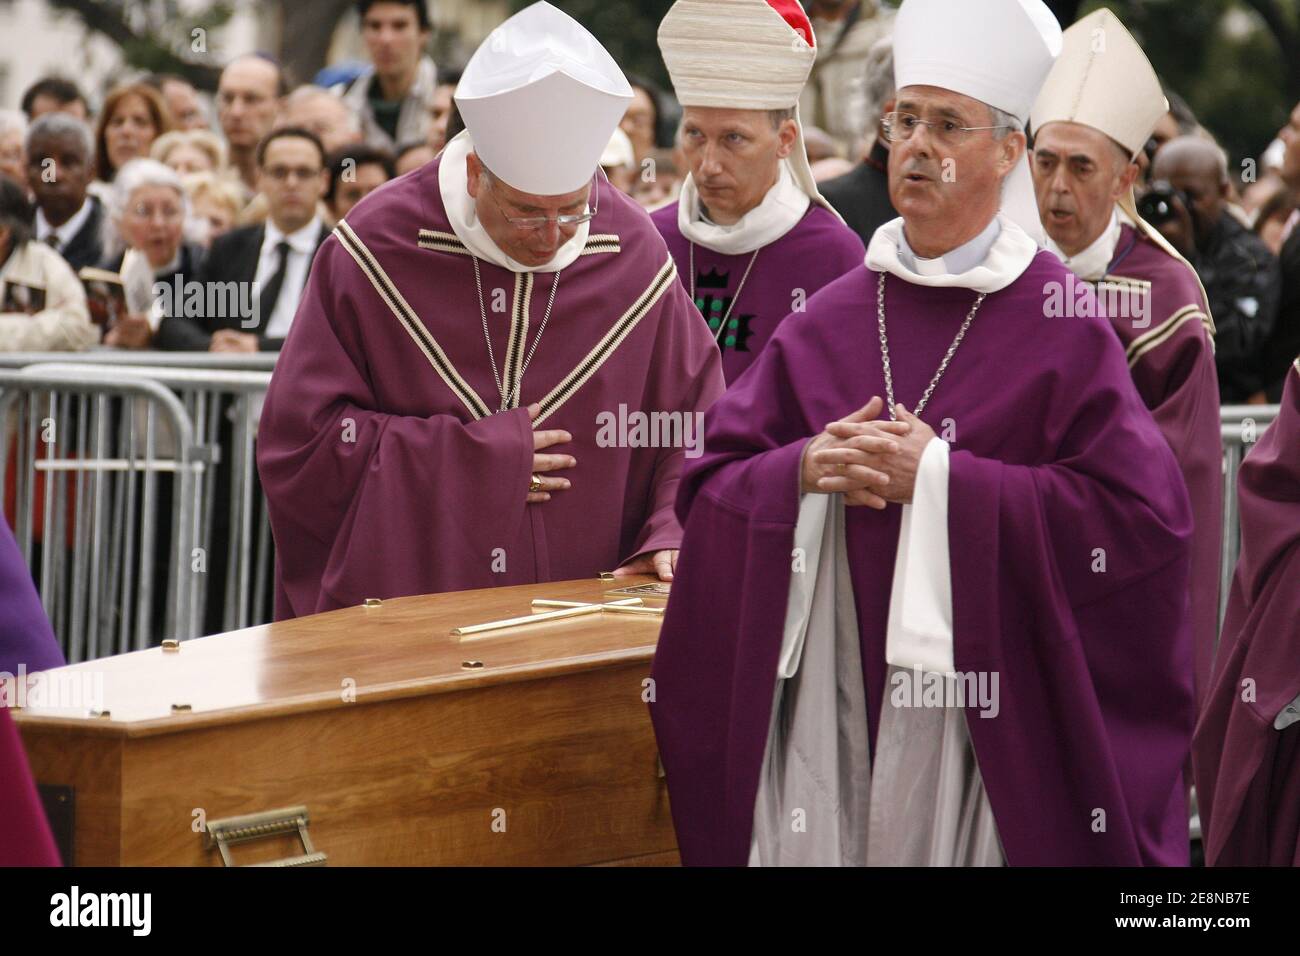 The coffin of Jean-Marie Lustiger is carried at Notre-Dame Cathedral in  Paris, France on August 10, 2007. Photo by Thierry Orban/ABACAPRESS.COM  Stock Photo - Alamy